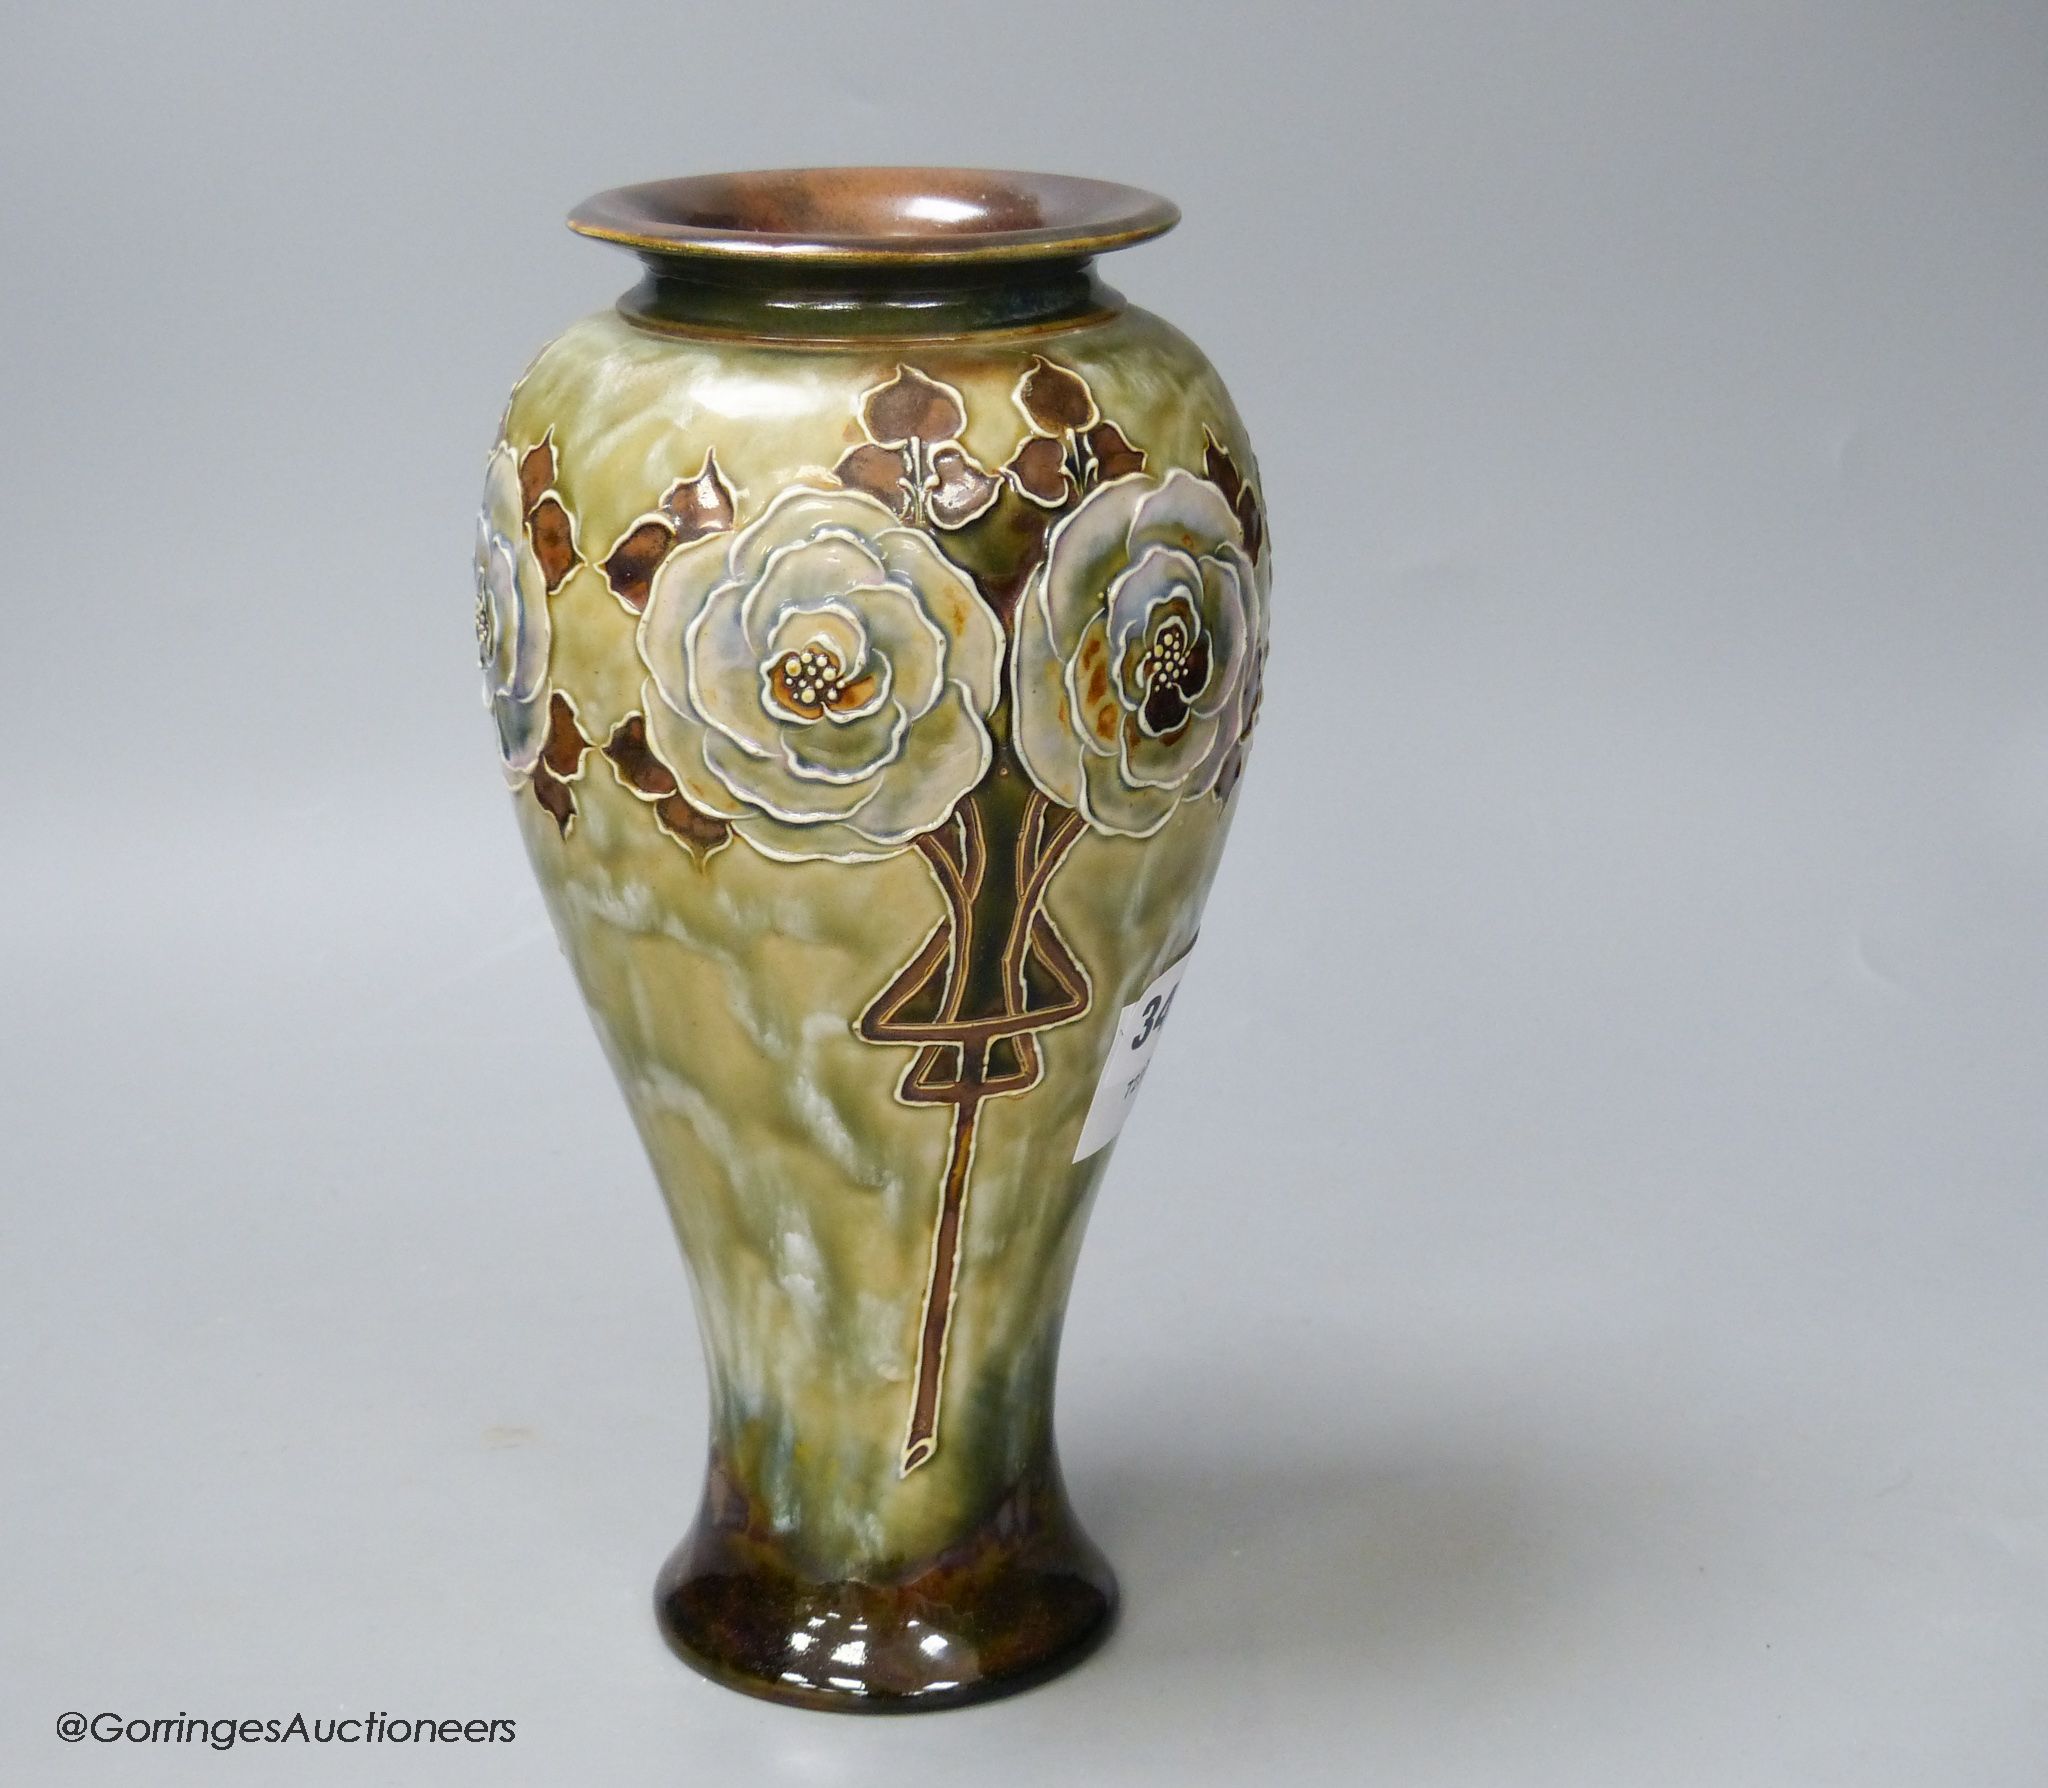 A Royal Doulton stoneware vase decorated with white roses by Eliza Simmance - Image 2 of 3